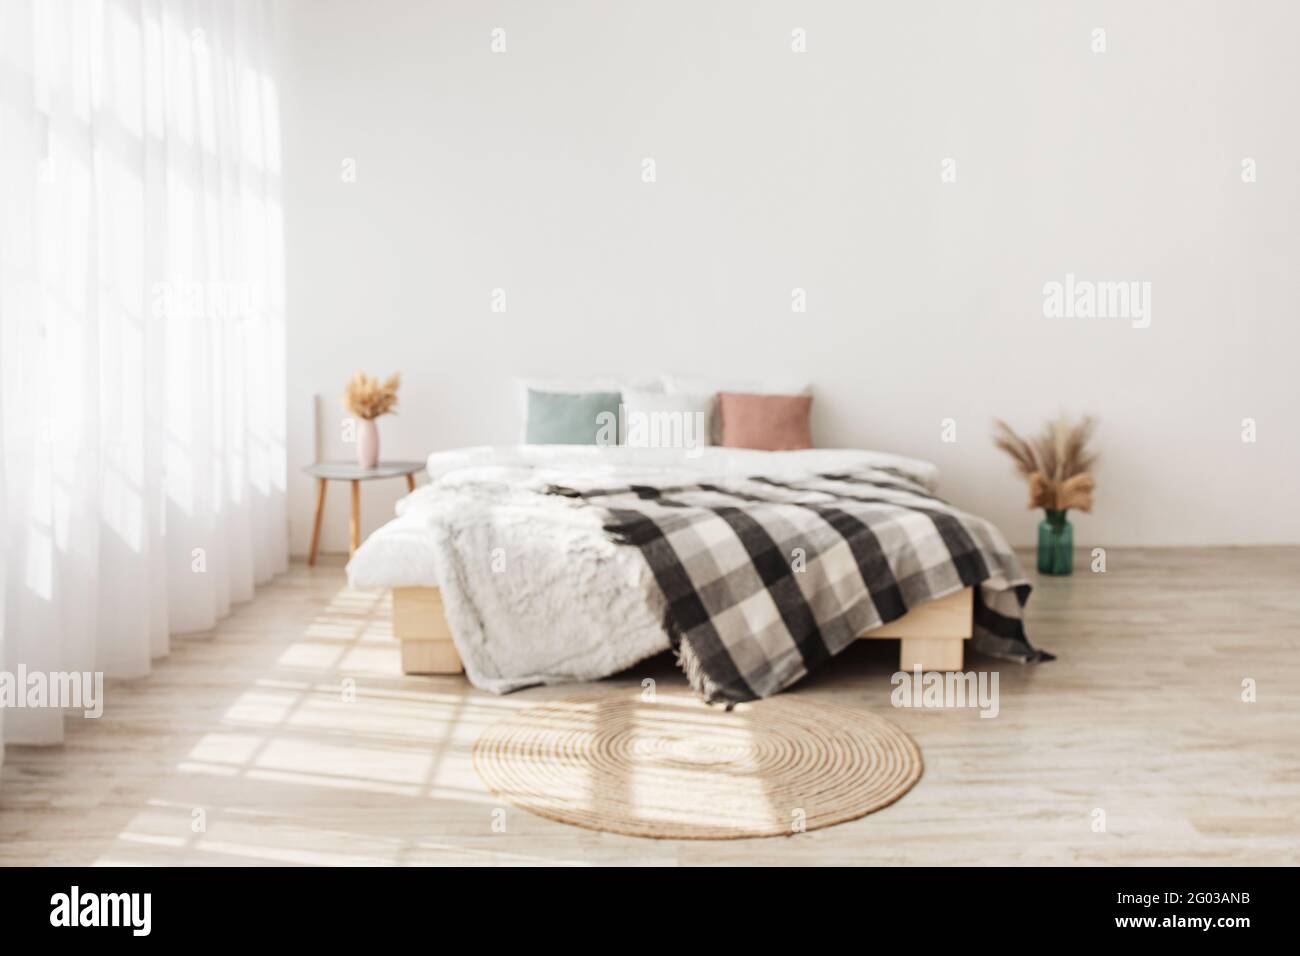 Contemporary boho design in minimalist. Bed with pillows and blanket, table with dry plants in vases Stock Photo